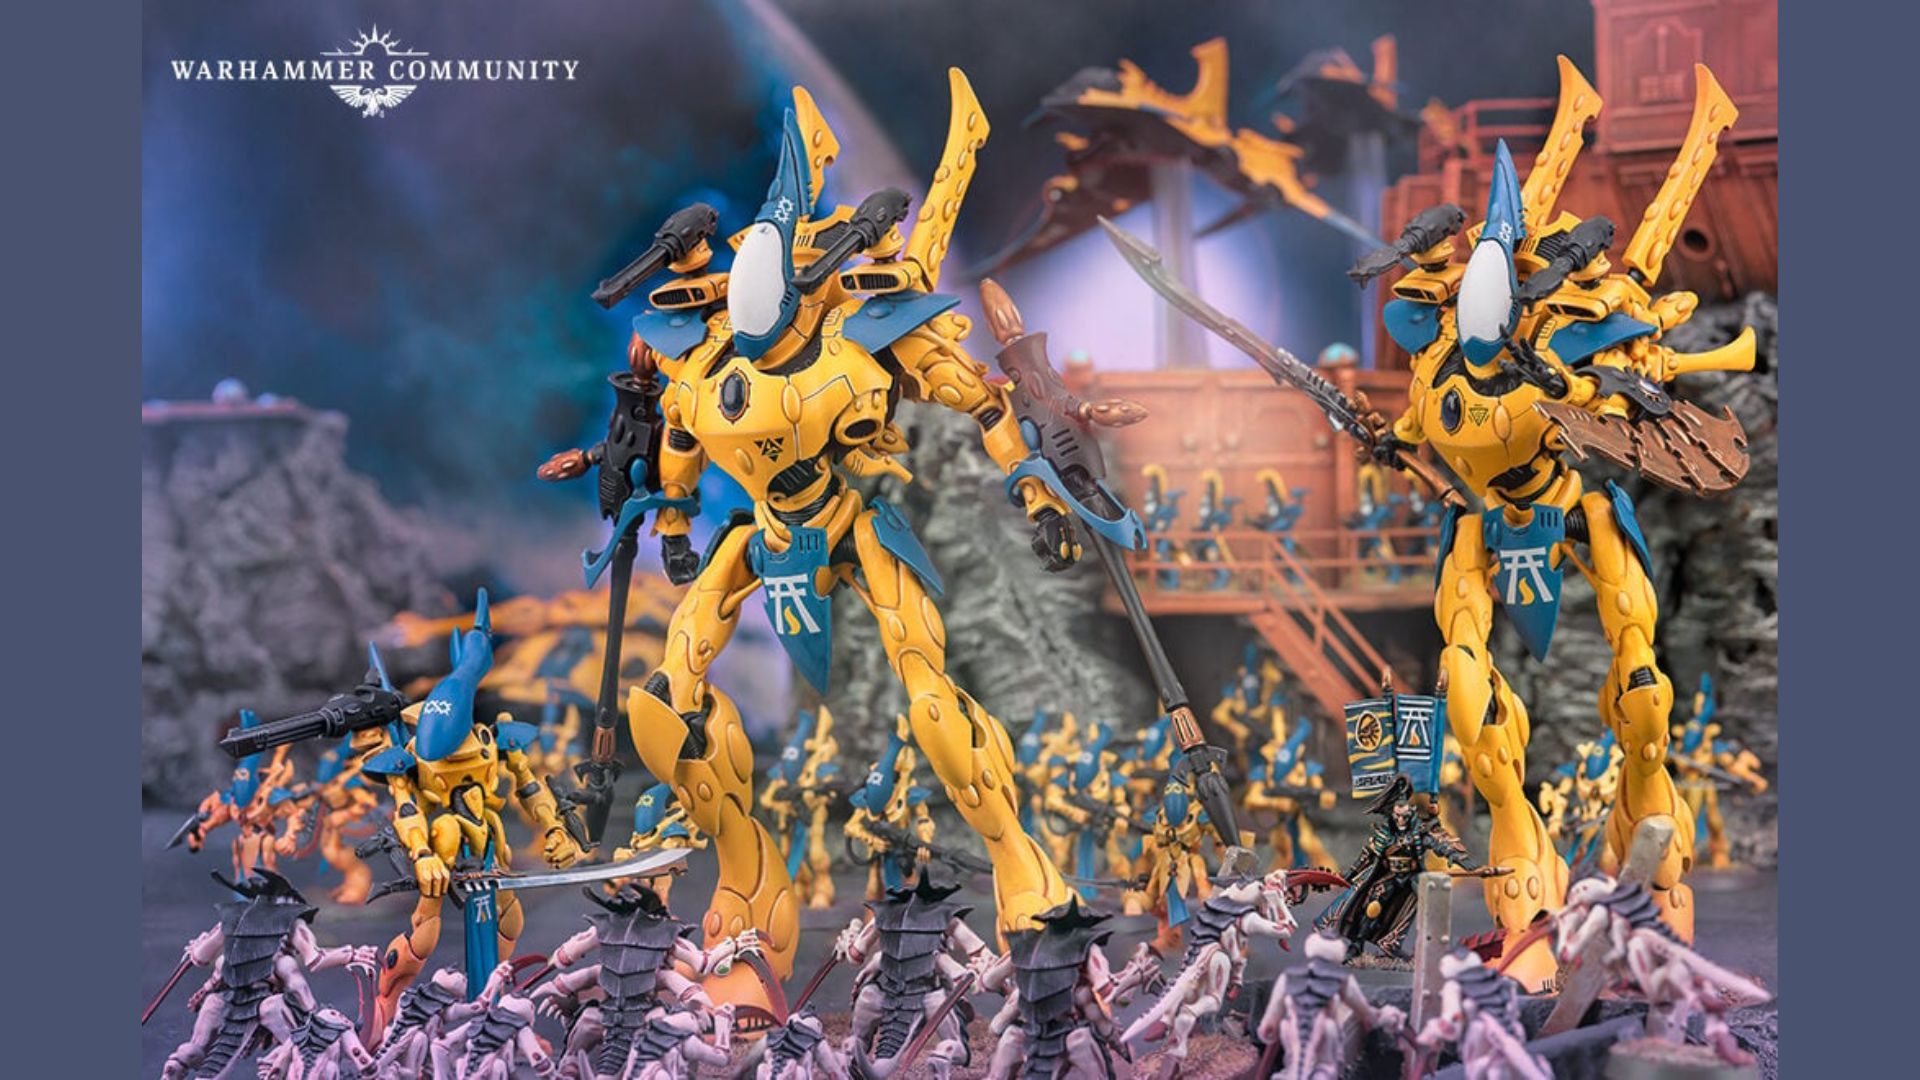 Warhammer fans hate change and when things stay the same - an Aeldari Wraithknight, a huge yellow and blue bipedal construct